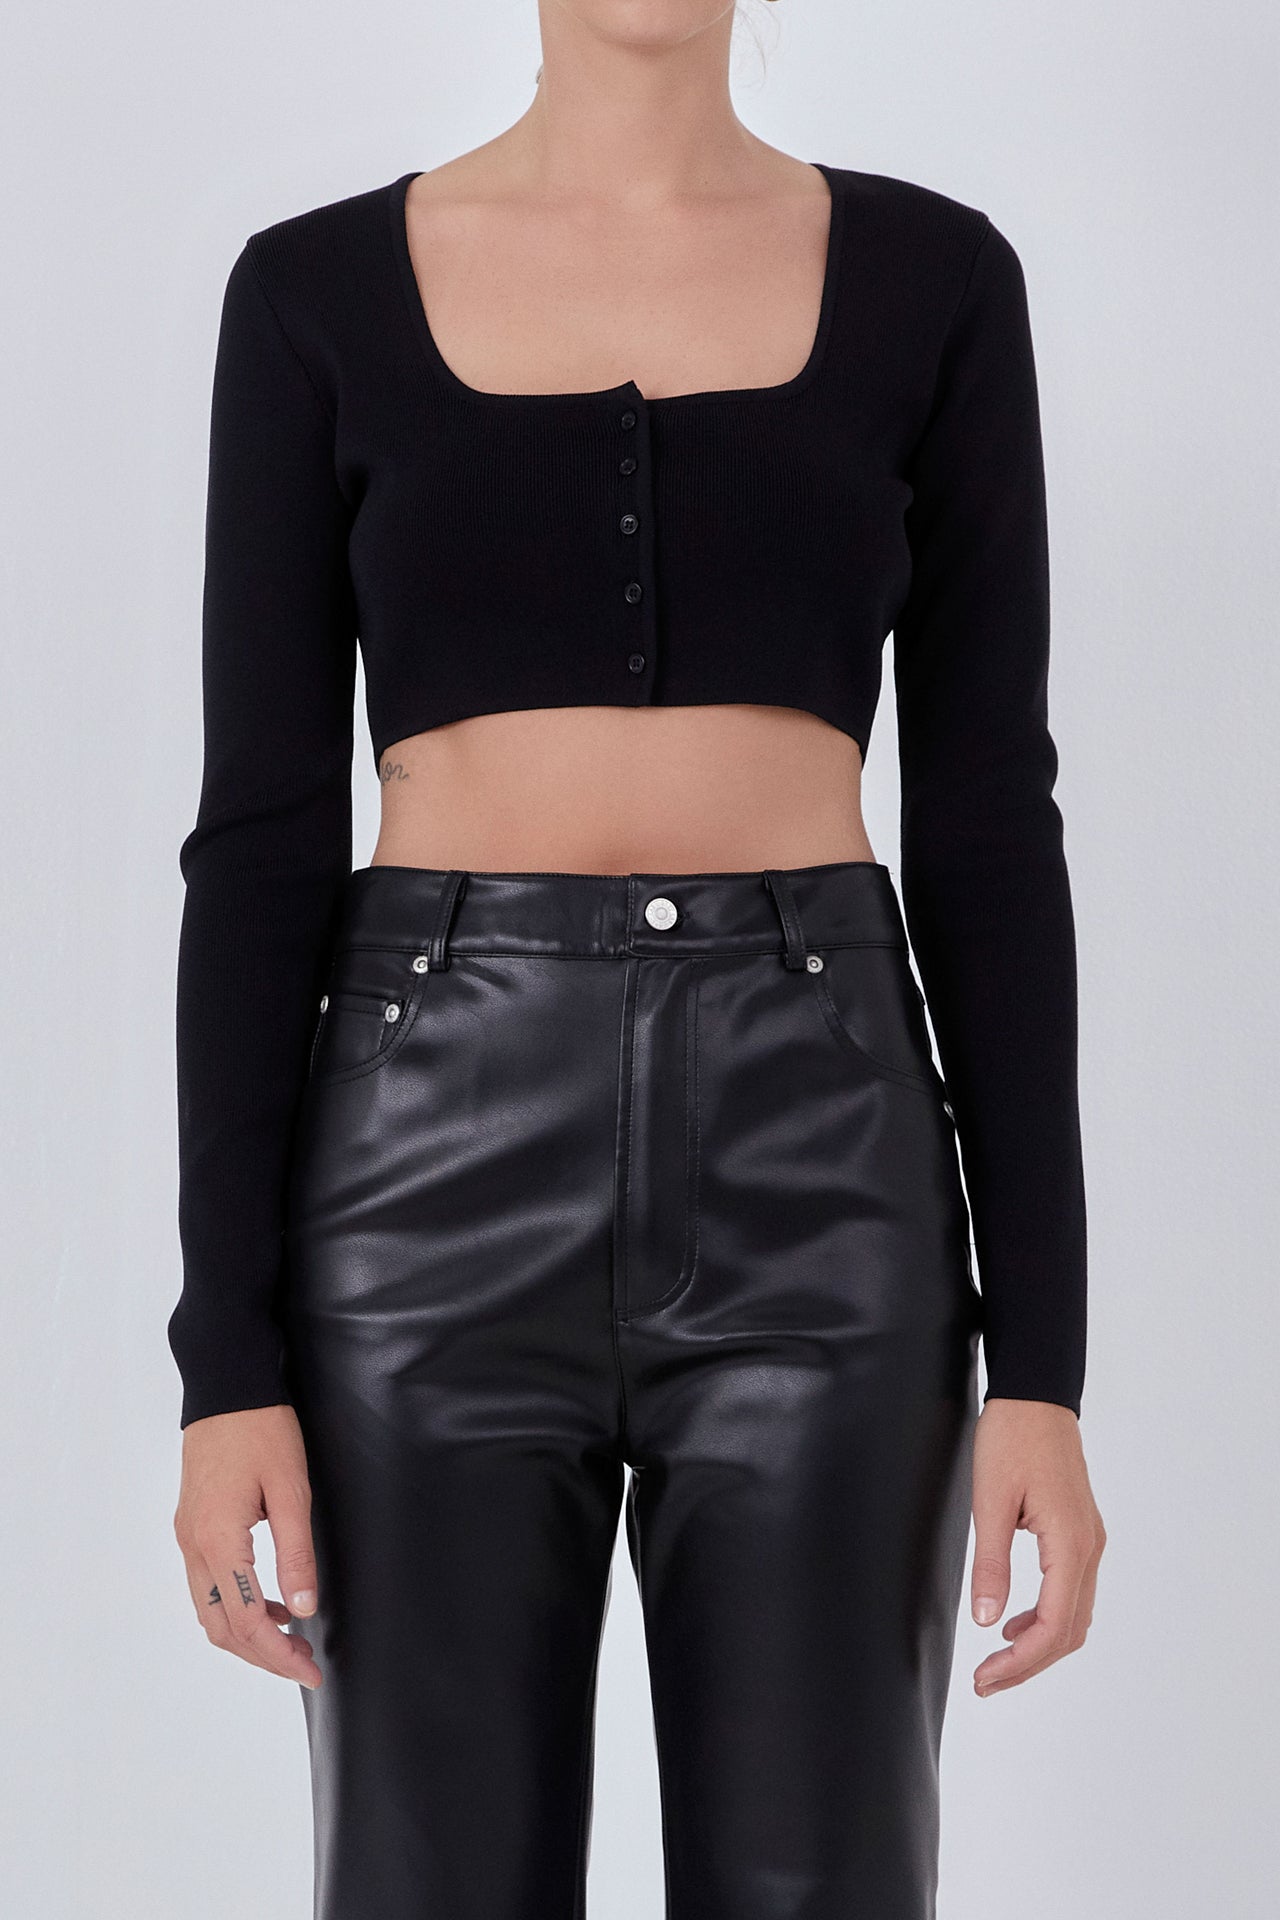 ENDLESS ROSE - Cropped Knit Buttoned Top - TOPS available at Objectrare